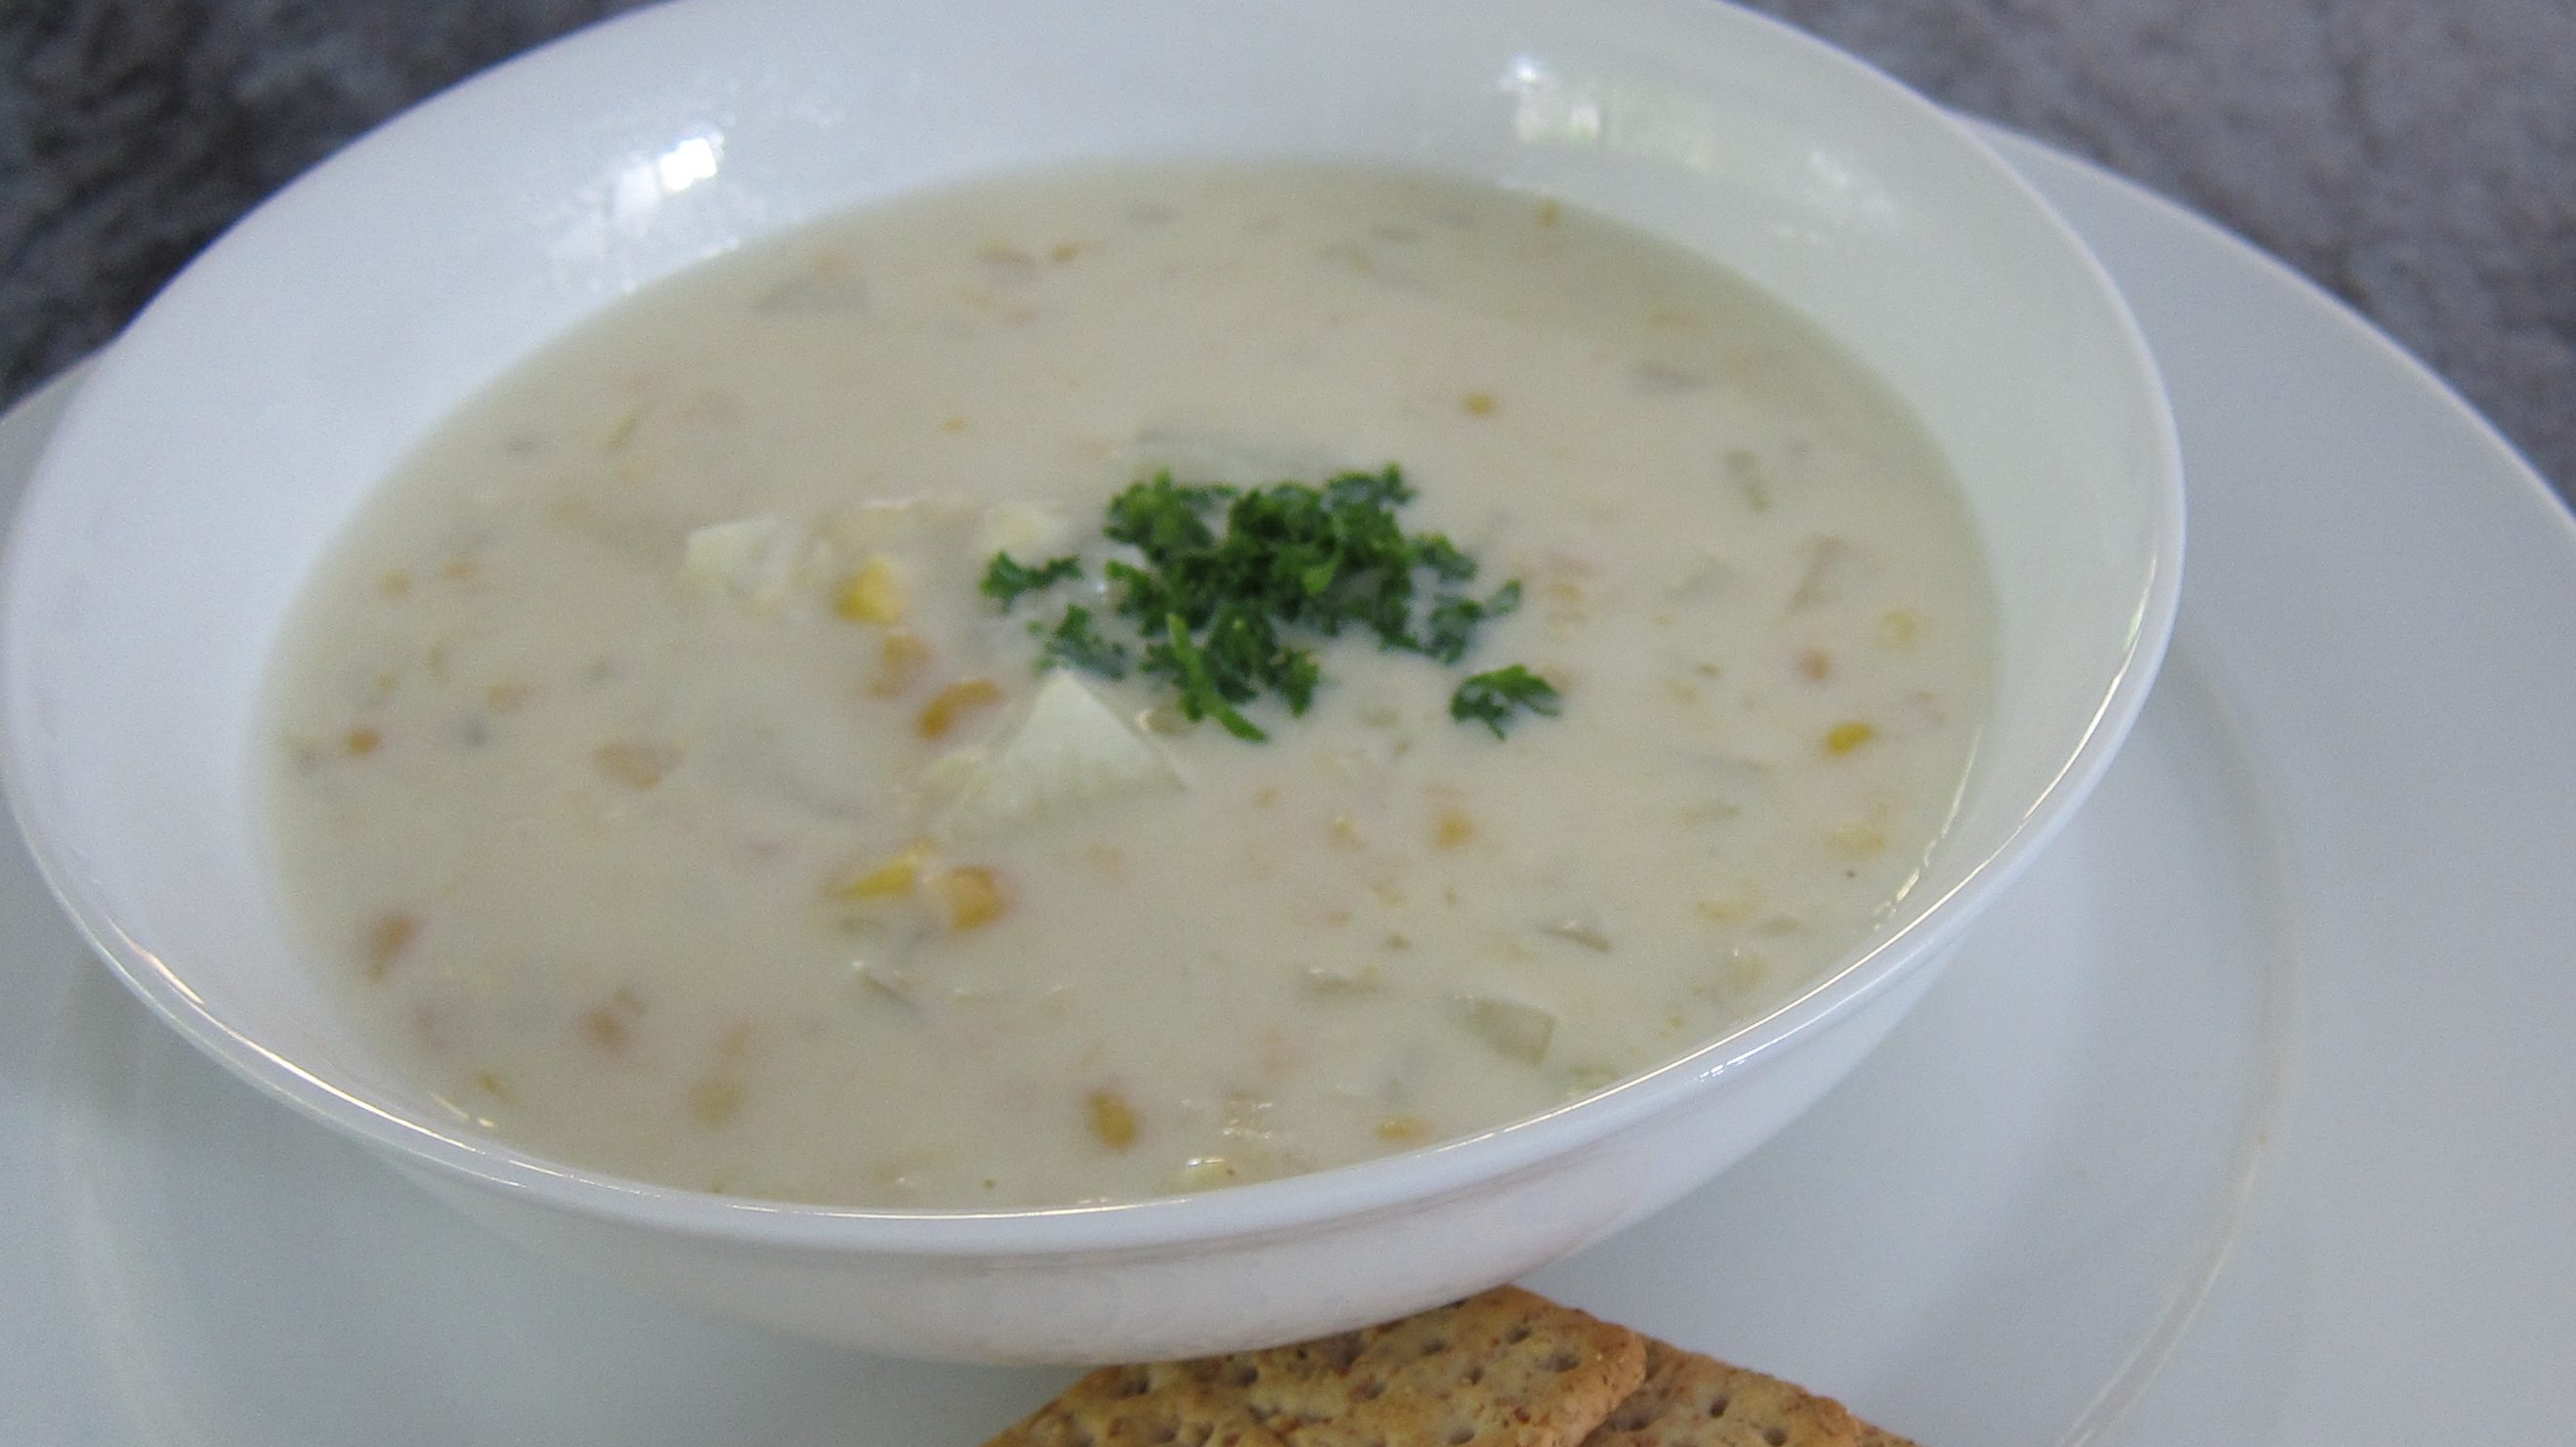 A bowl of whitish soup with corn and parsley on top, a few crackers at side.